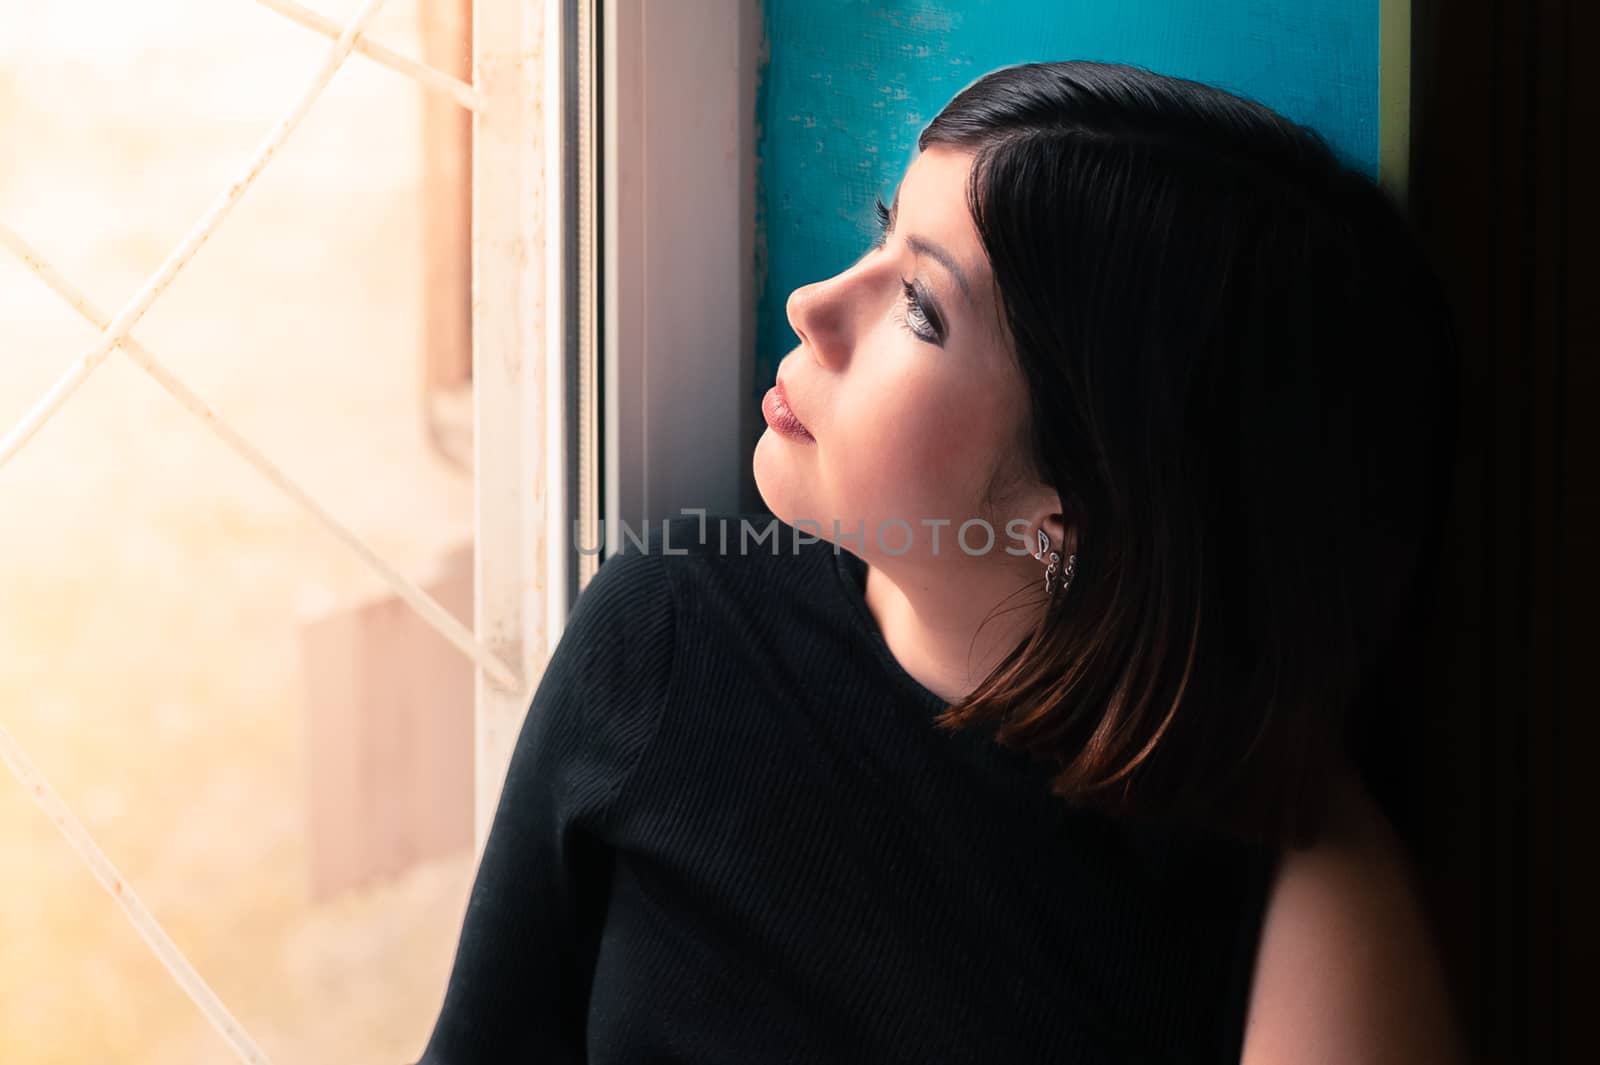 divine young girl with dark hair in black clothes looks out the window